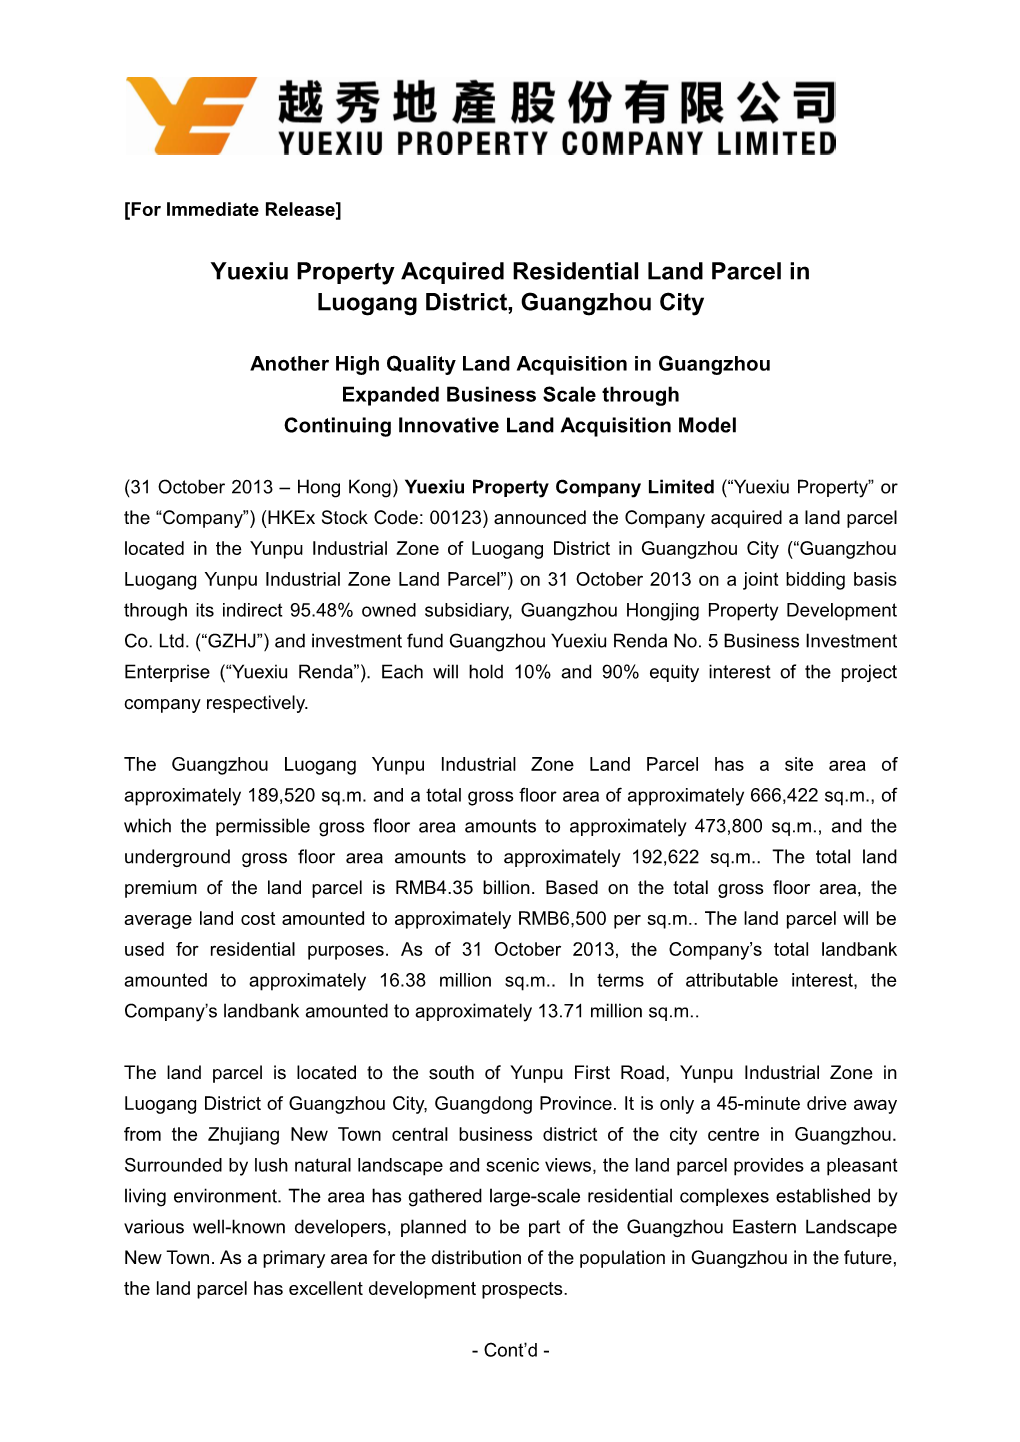 Yuexiu Property Acquired Residential Land Parcel in Luogang District, Guangzhou City